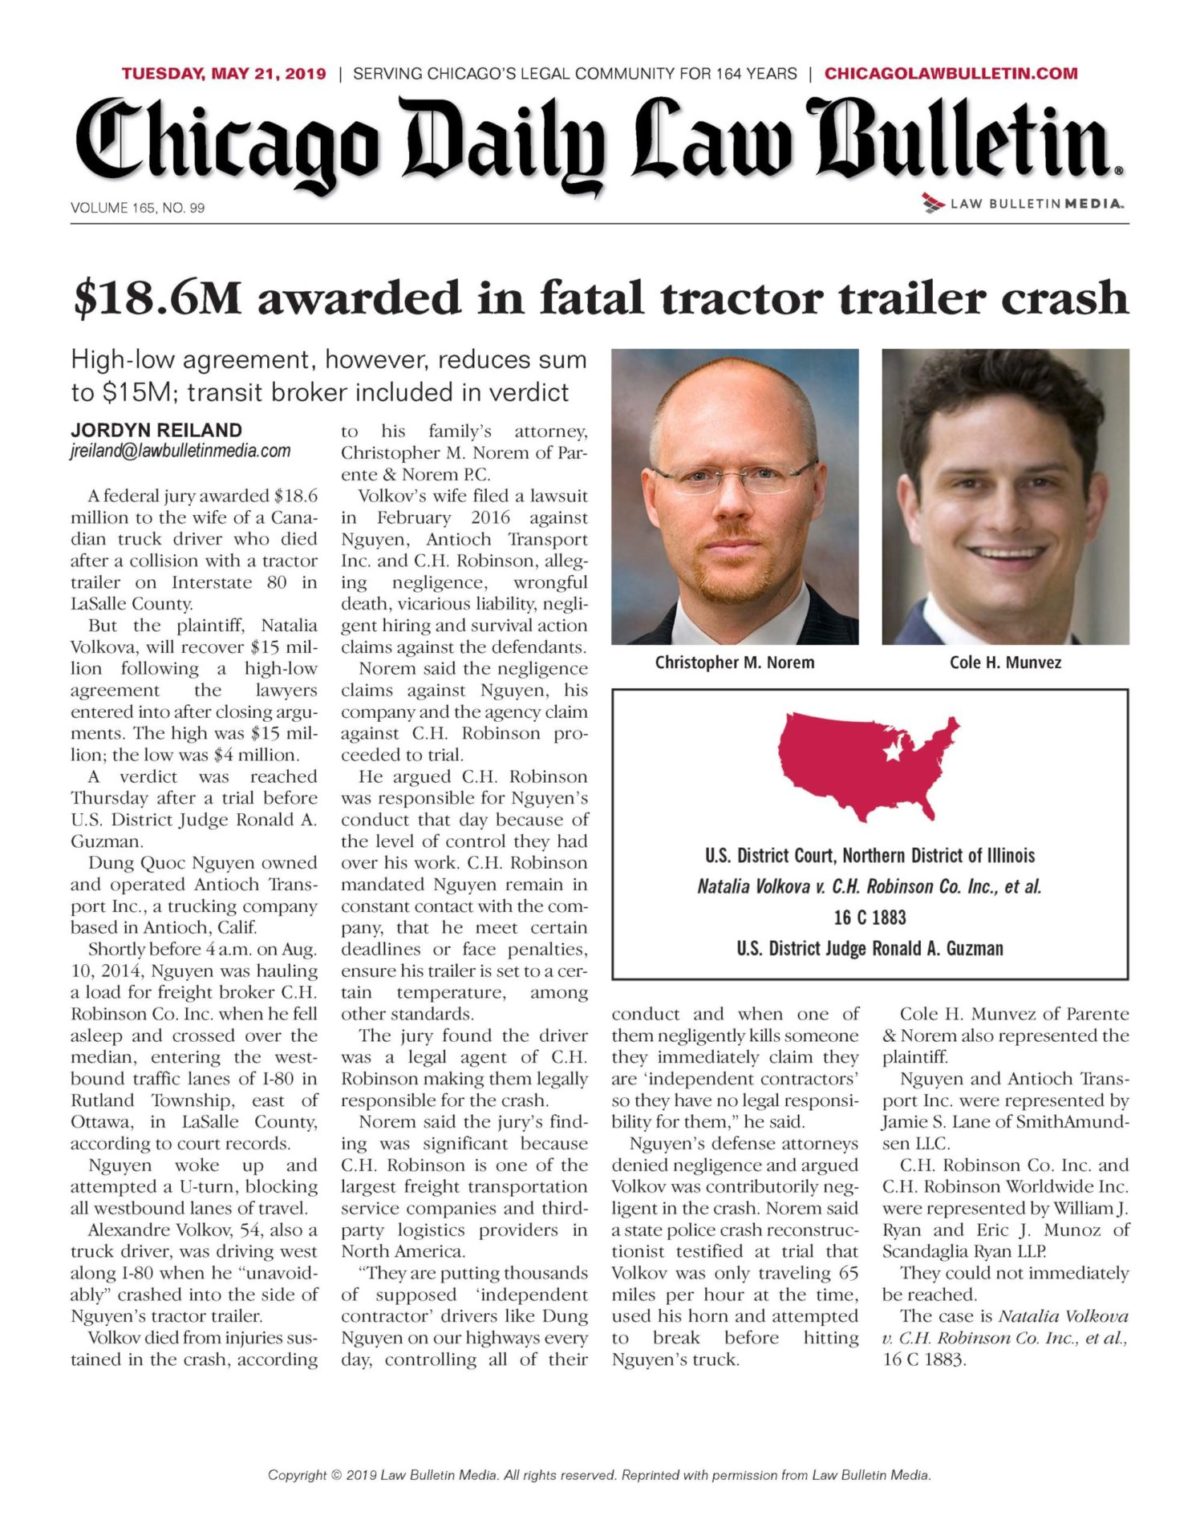 $18.6M awarded in fatal tractor trailer crash